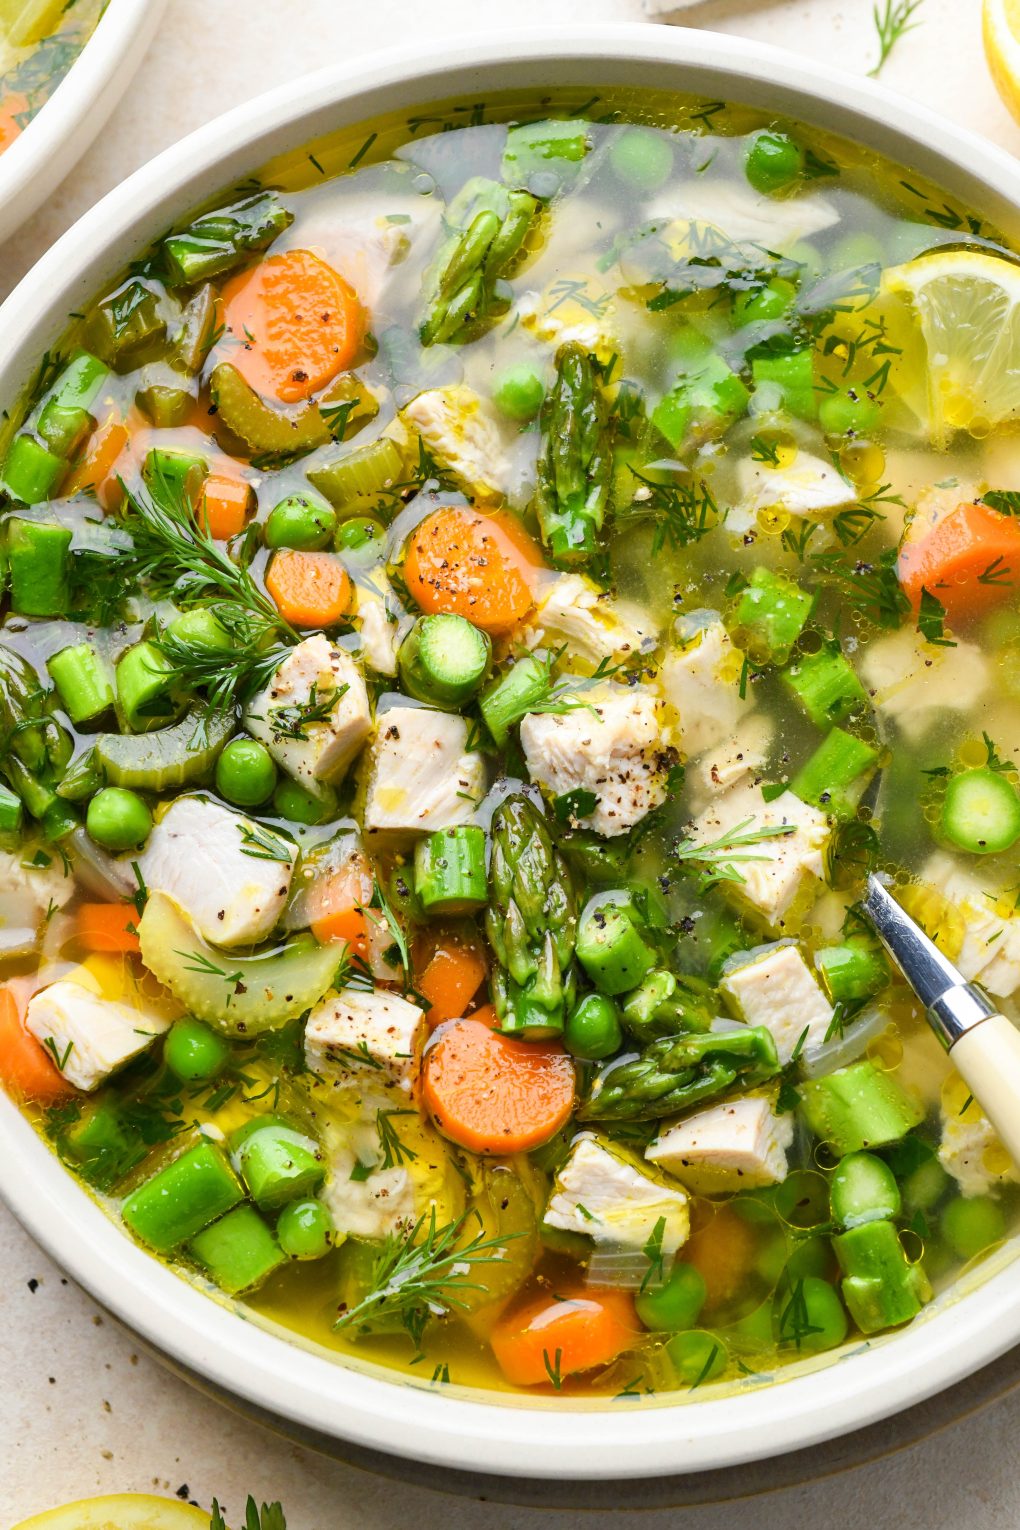 A shallow ceramic bowl filled with chicken soup with spring vegetables - peas, carrots, celery, and asparagus. Garnished with fresh dill and lemon wedges.